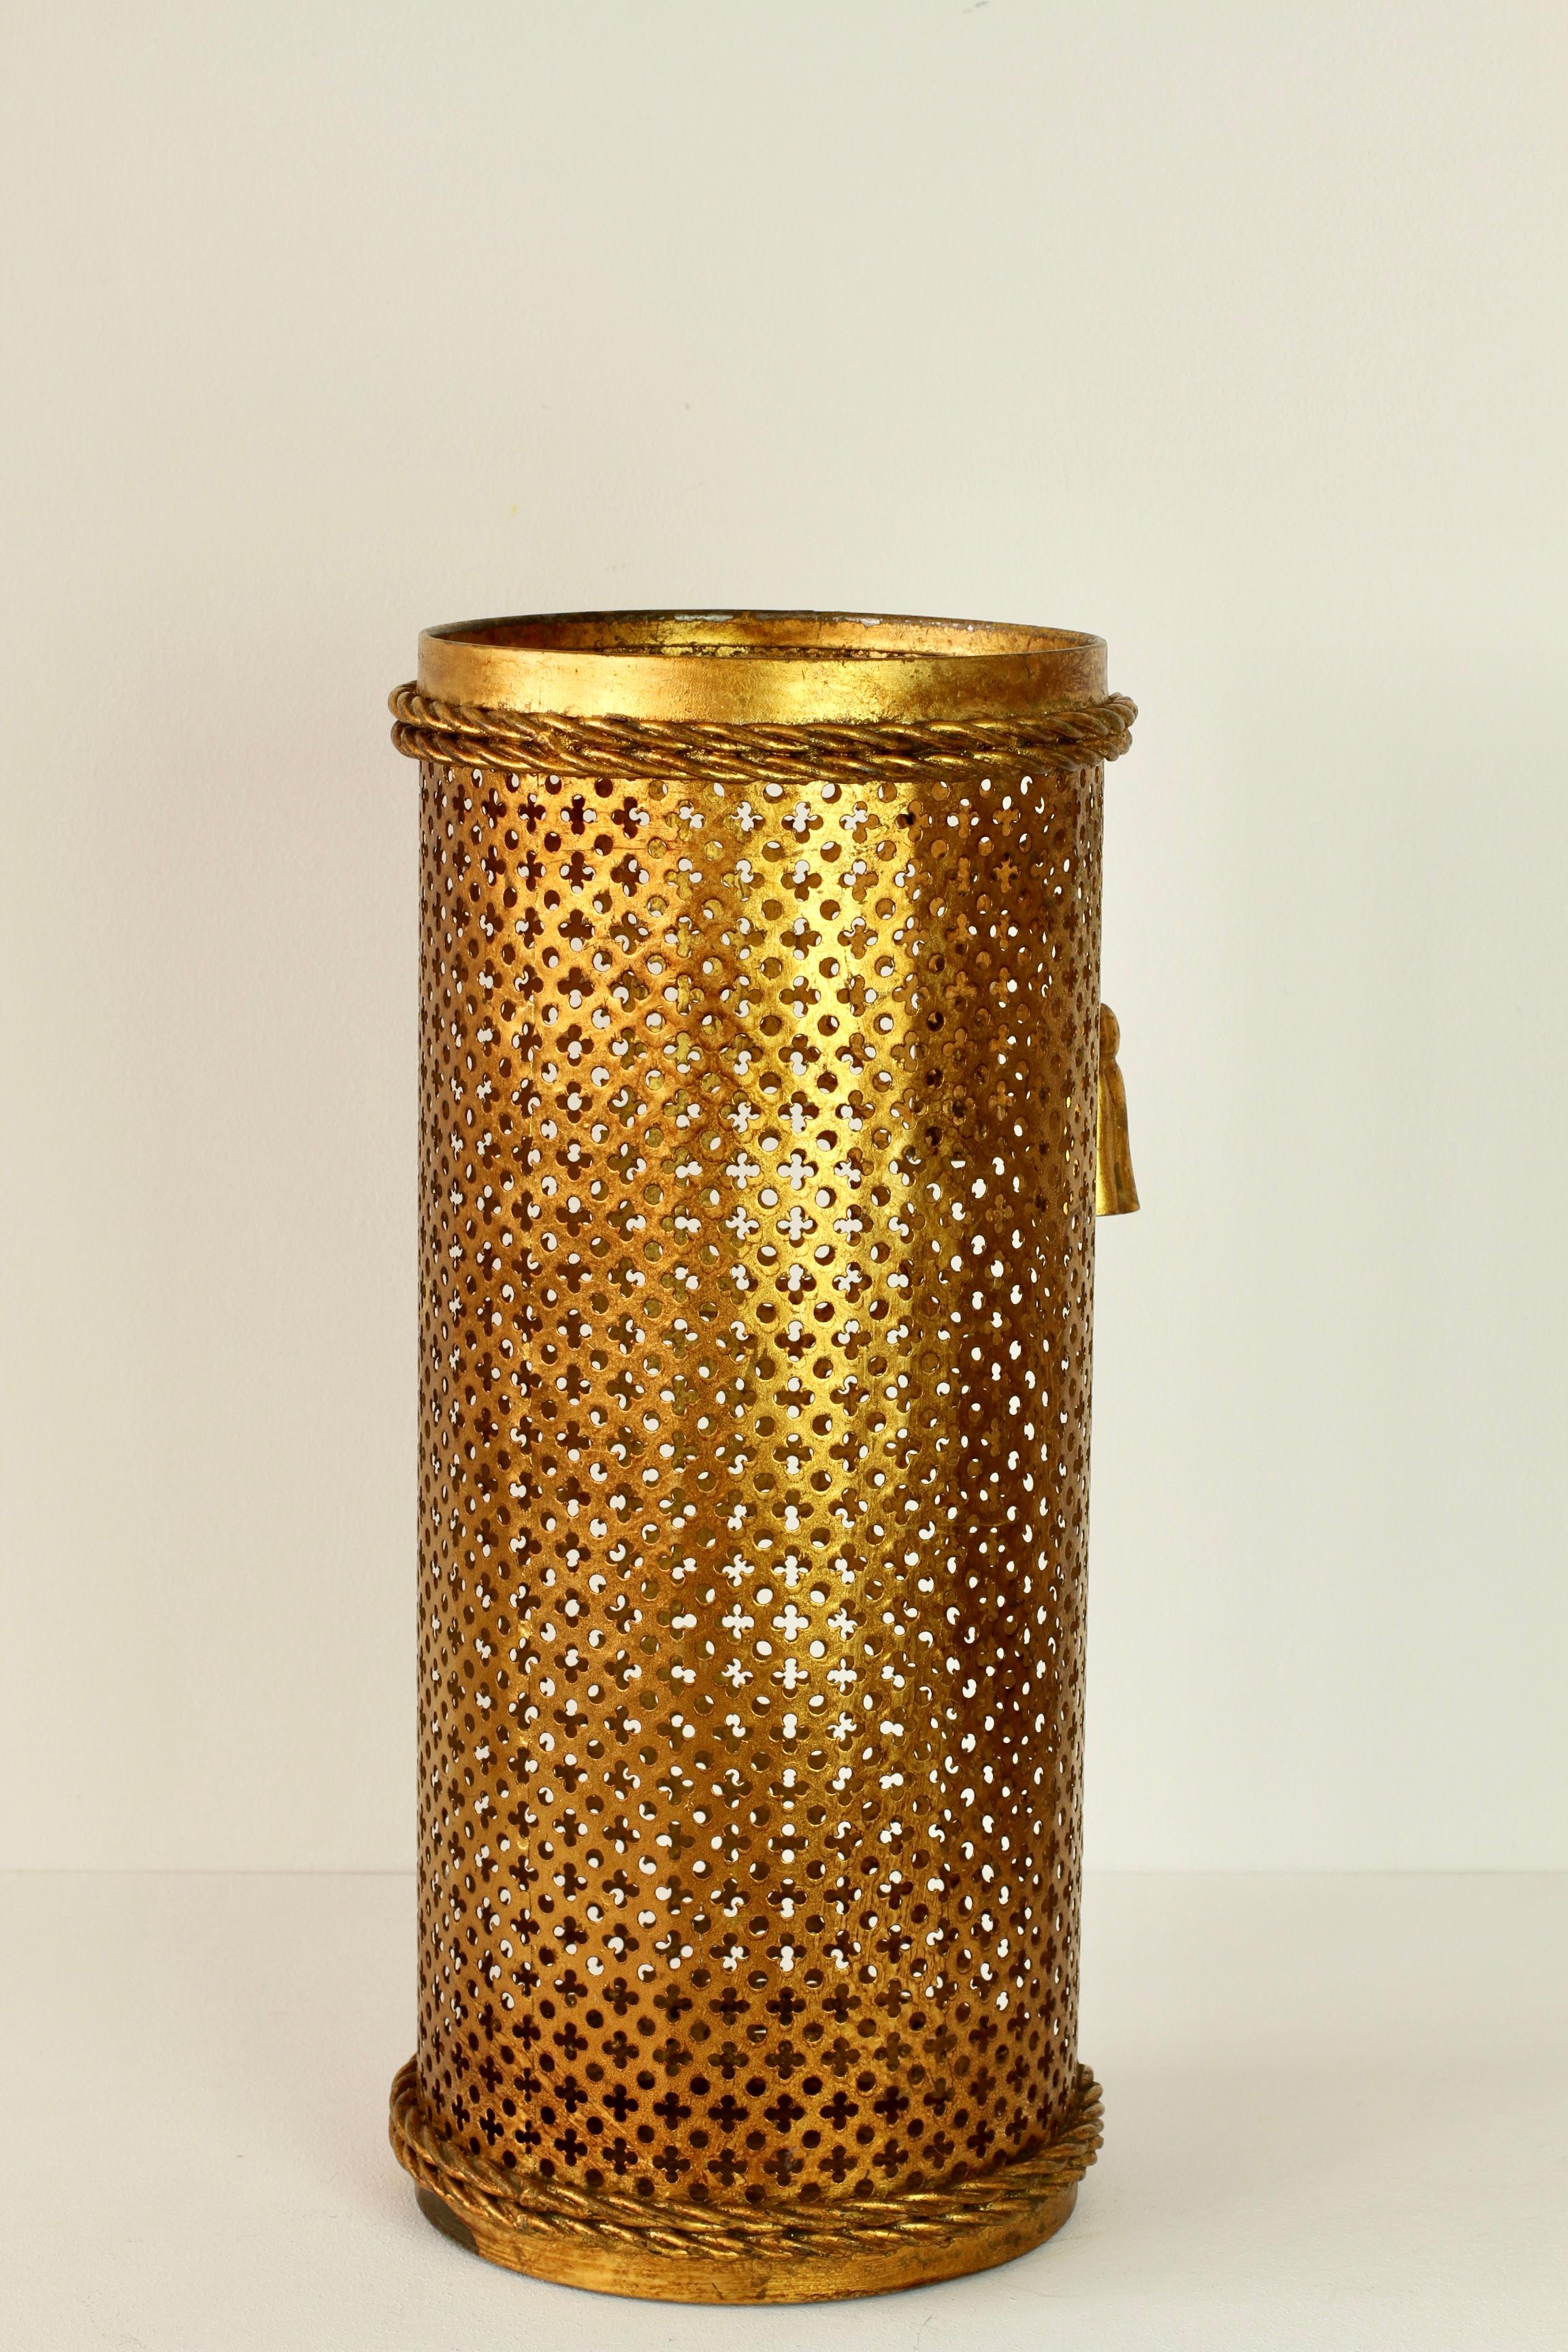 Midcentury Italian Hollywood Regency Gold Gilded Umbrella Stand or Holder, 1950s For Sale 1